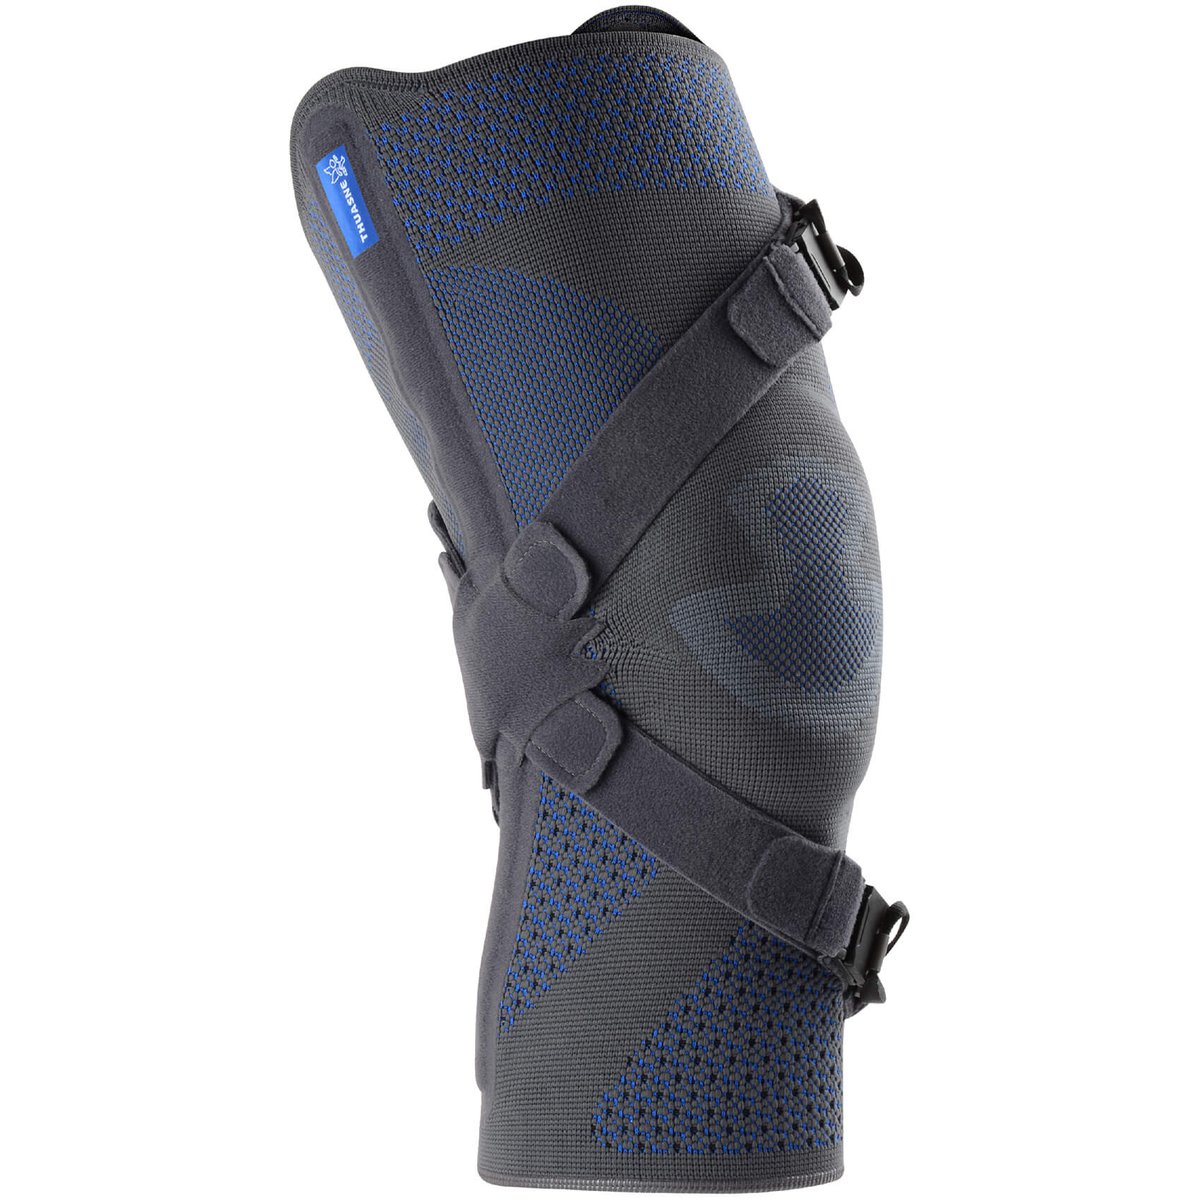 Innovative New Knee Brace Already Showing Fantastic Results Orthopaedic  Product News